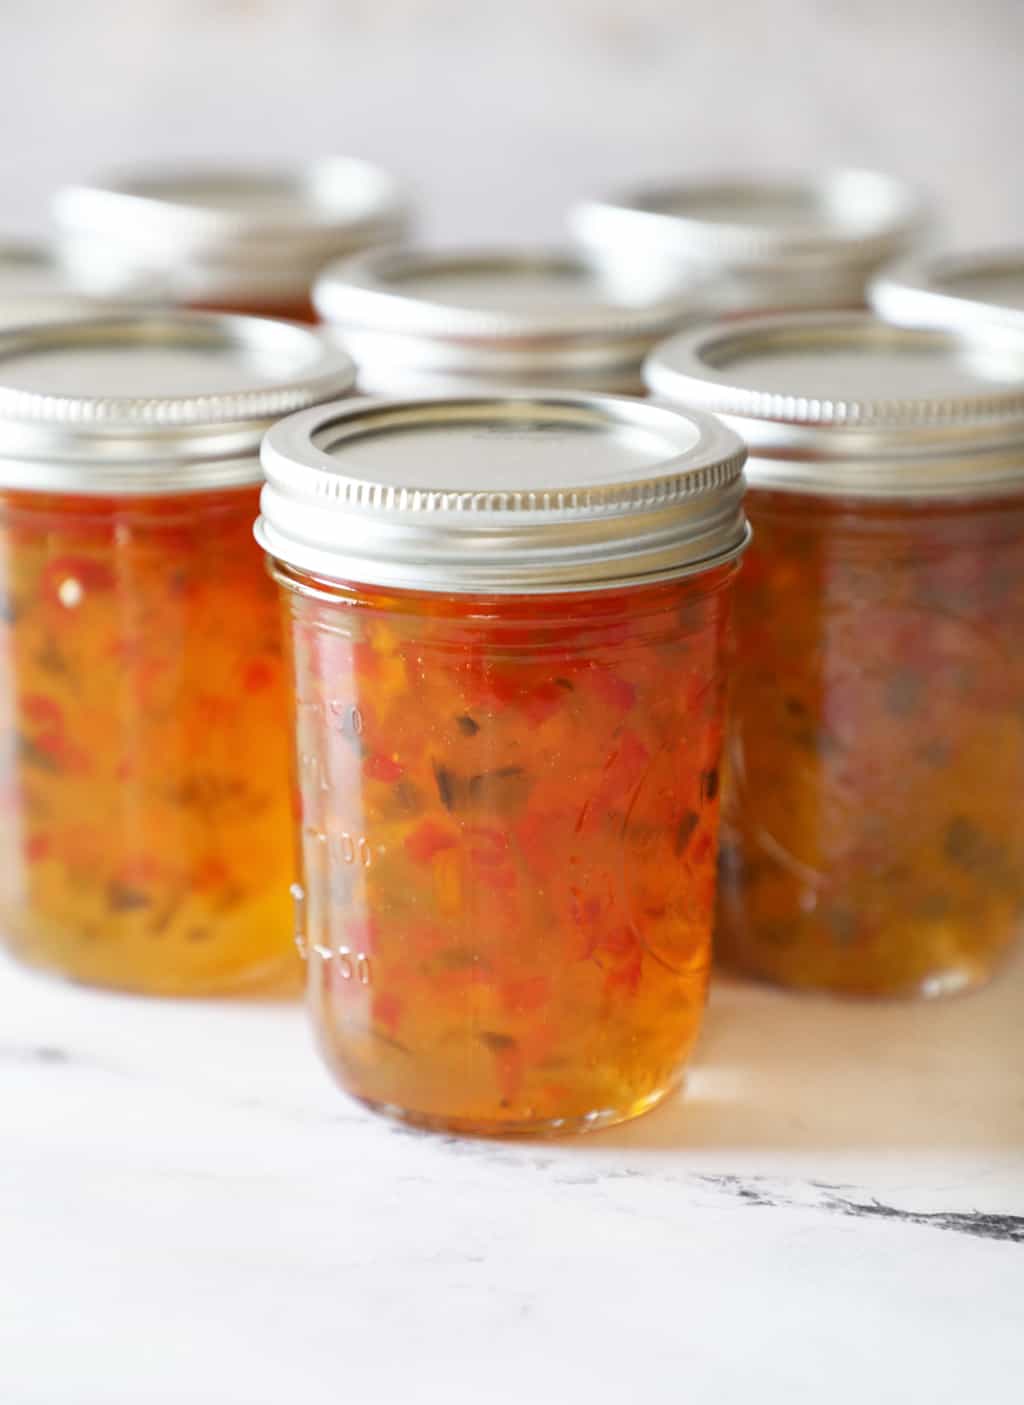 several jars with hot pepper jelly right after being canned